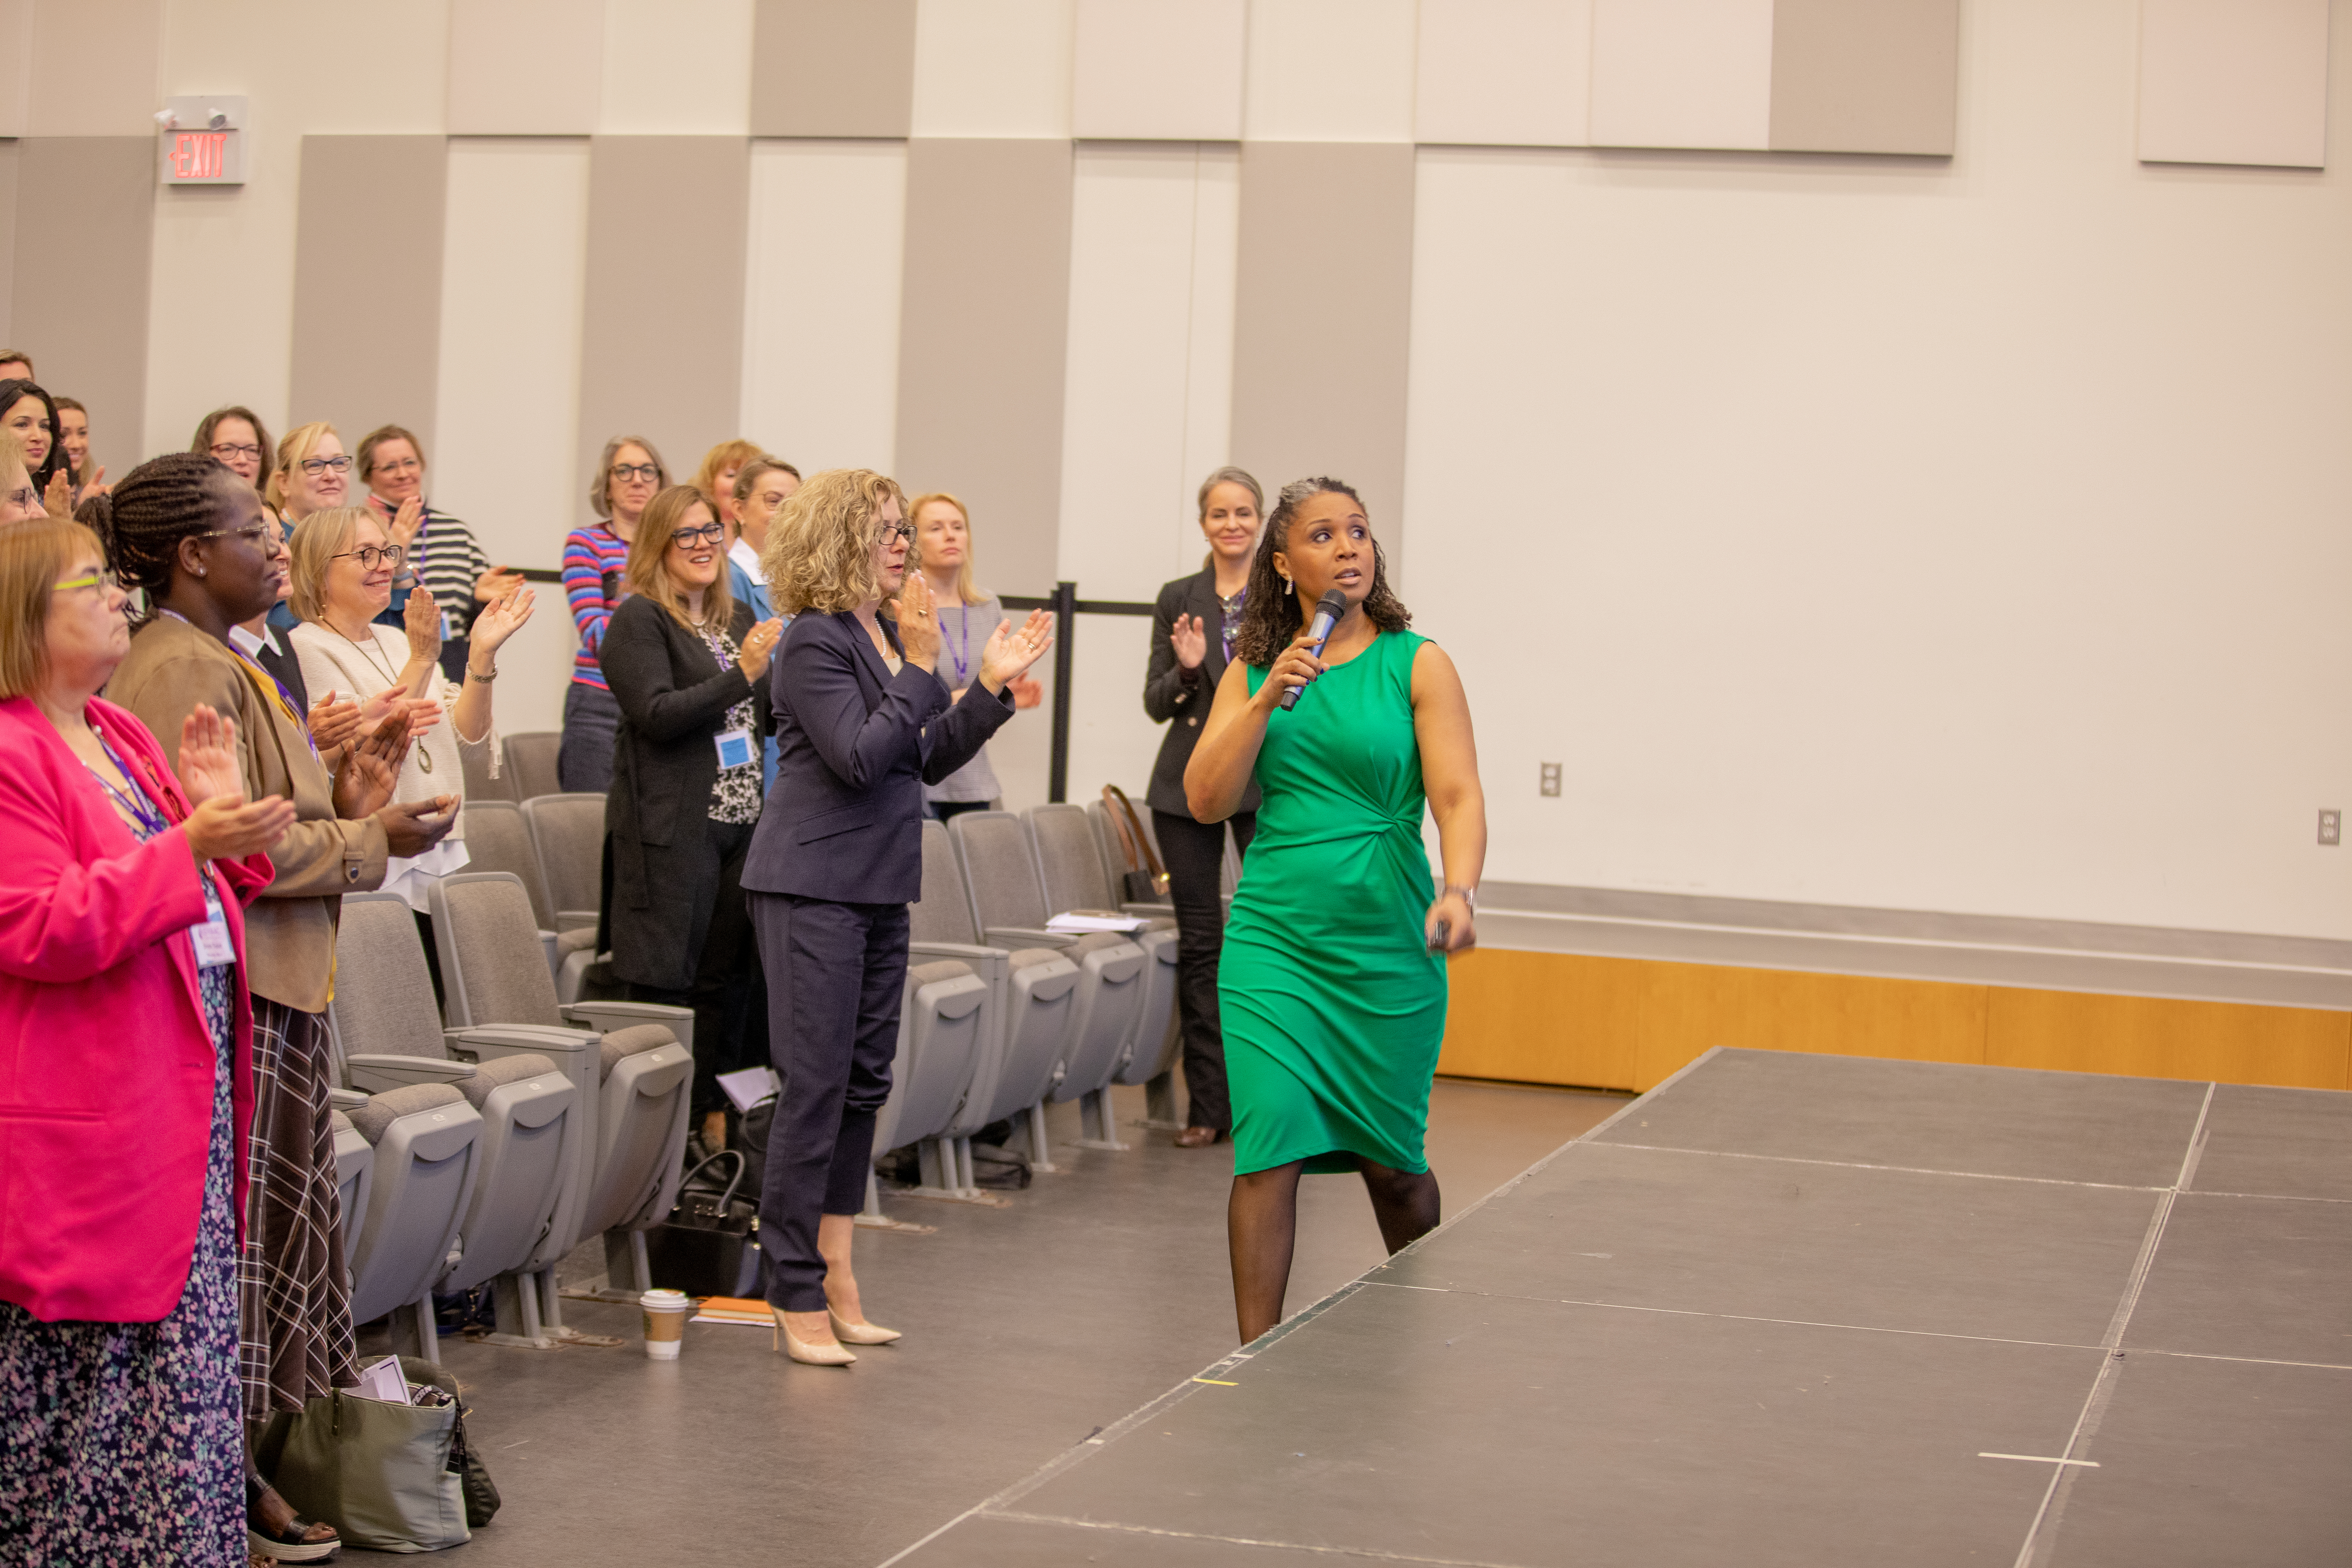 Jennifer Slay, Director of Equity, Diversity, Inclusion and Decolonization at King’s University College, engages the crowd inside the Joanne and Peter Kenny Theatre during a keynote presentation.